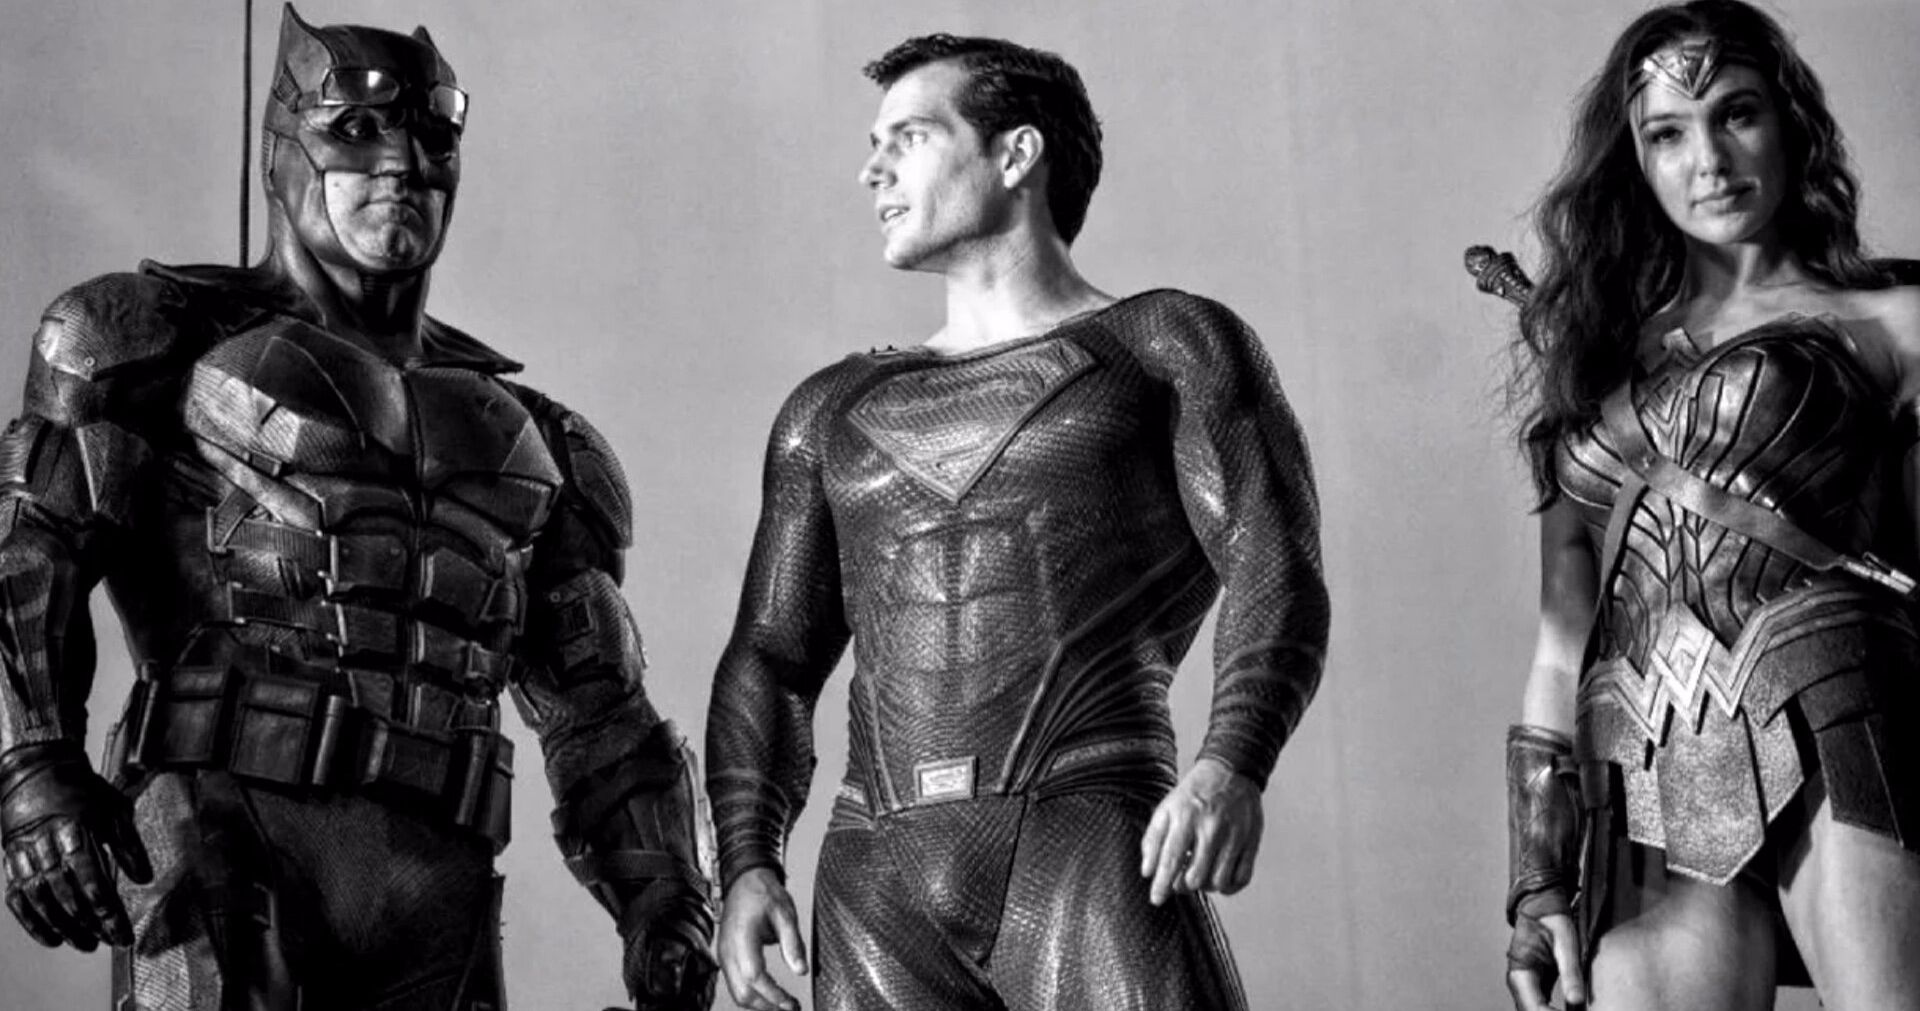 Unseen Movies Like the Snyder Cut Are a Terrible Thing Says The Invisible Man Director